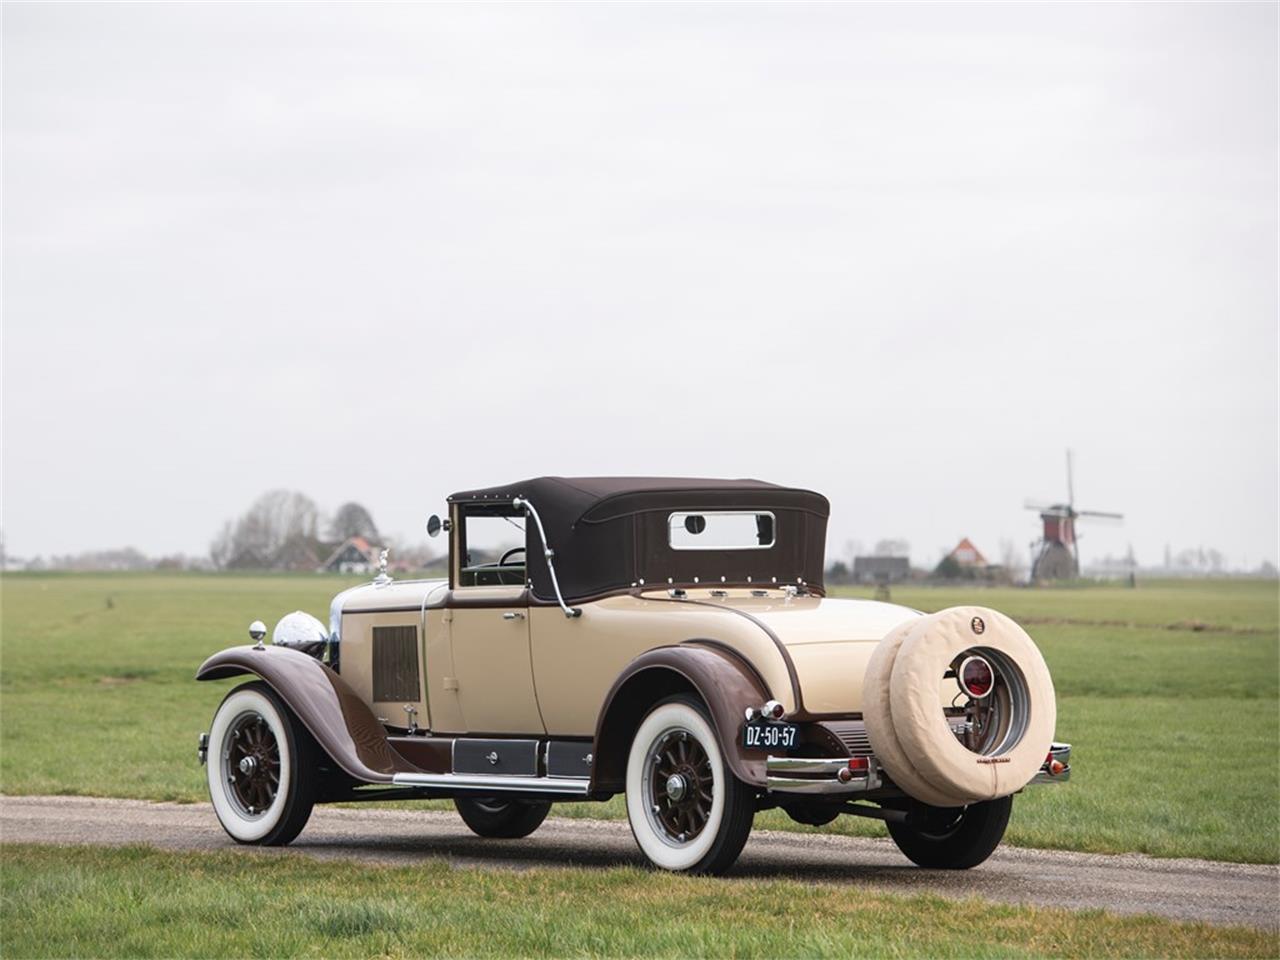 For Sale at Auction: 1929 Cadillac Cabriolet for sale in Essen, Other